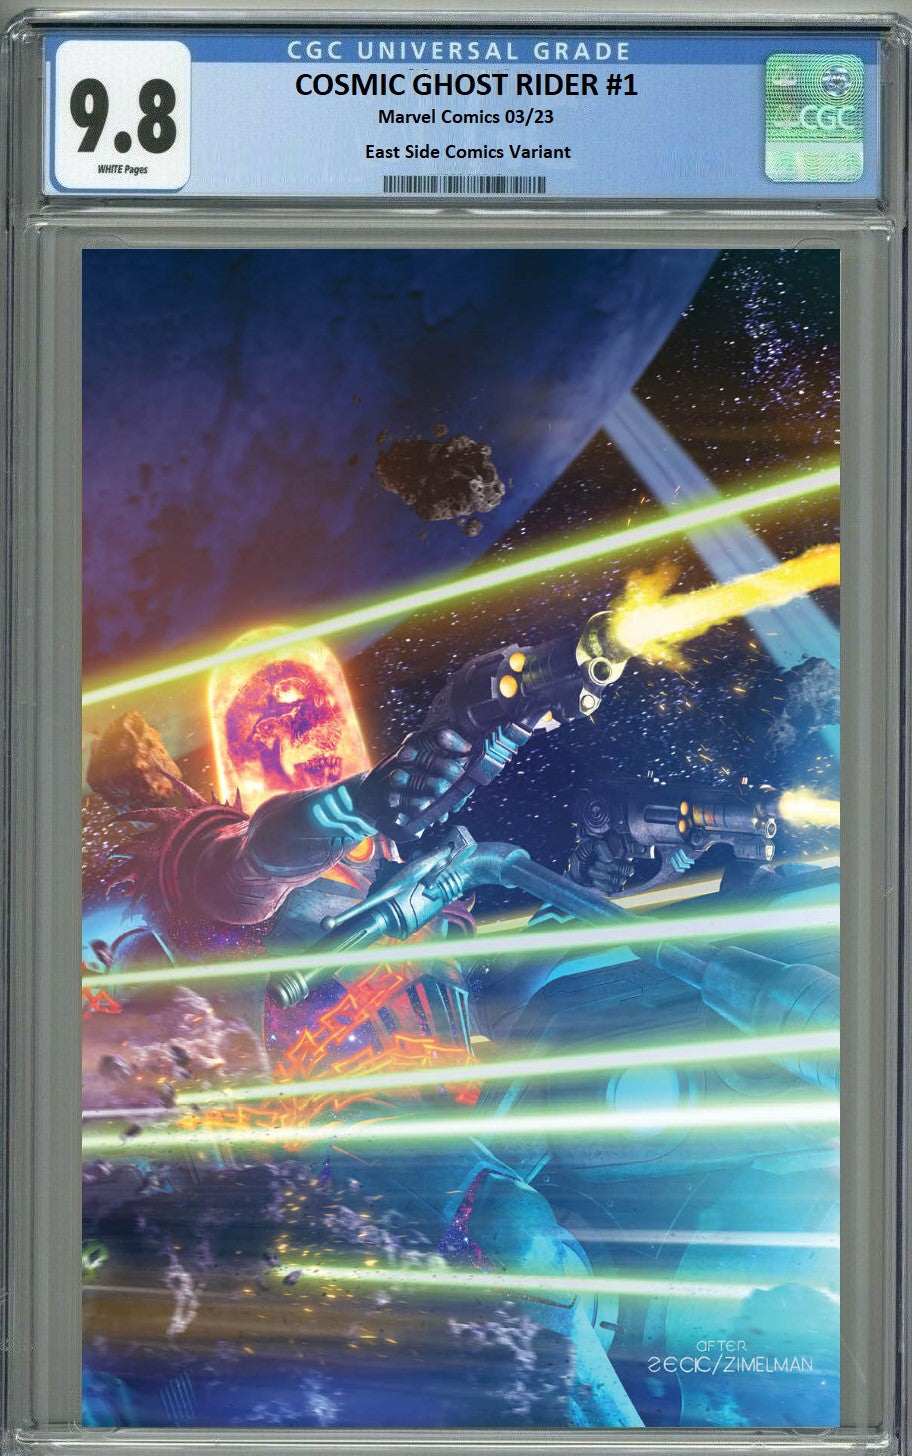 COSMIC GHOST RIDER #1 RAHZZAH VIRGIN VARIANT LIMITED TO 600 COPIES WITH NUMBERED COA CGC 9.8 PREORDER